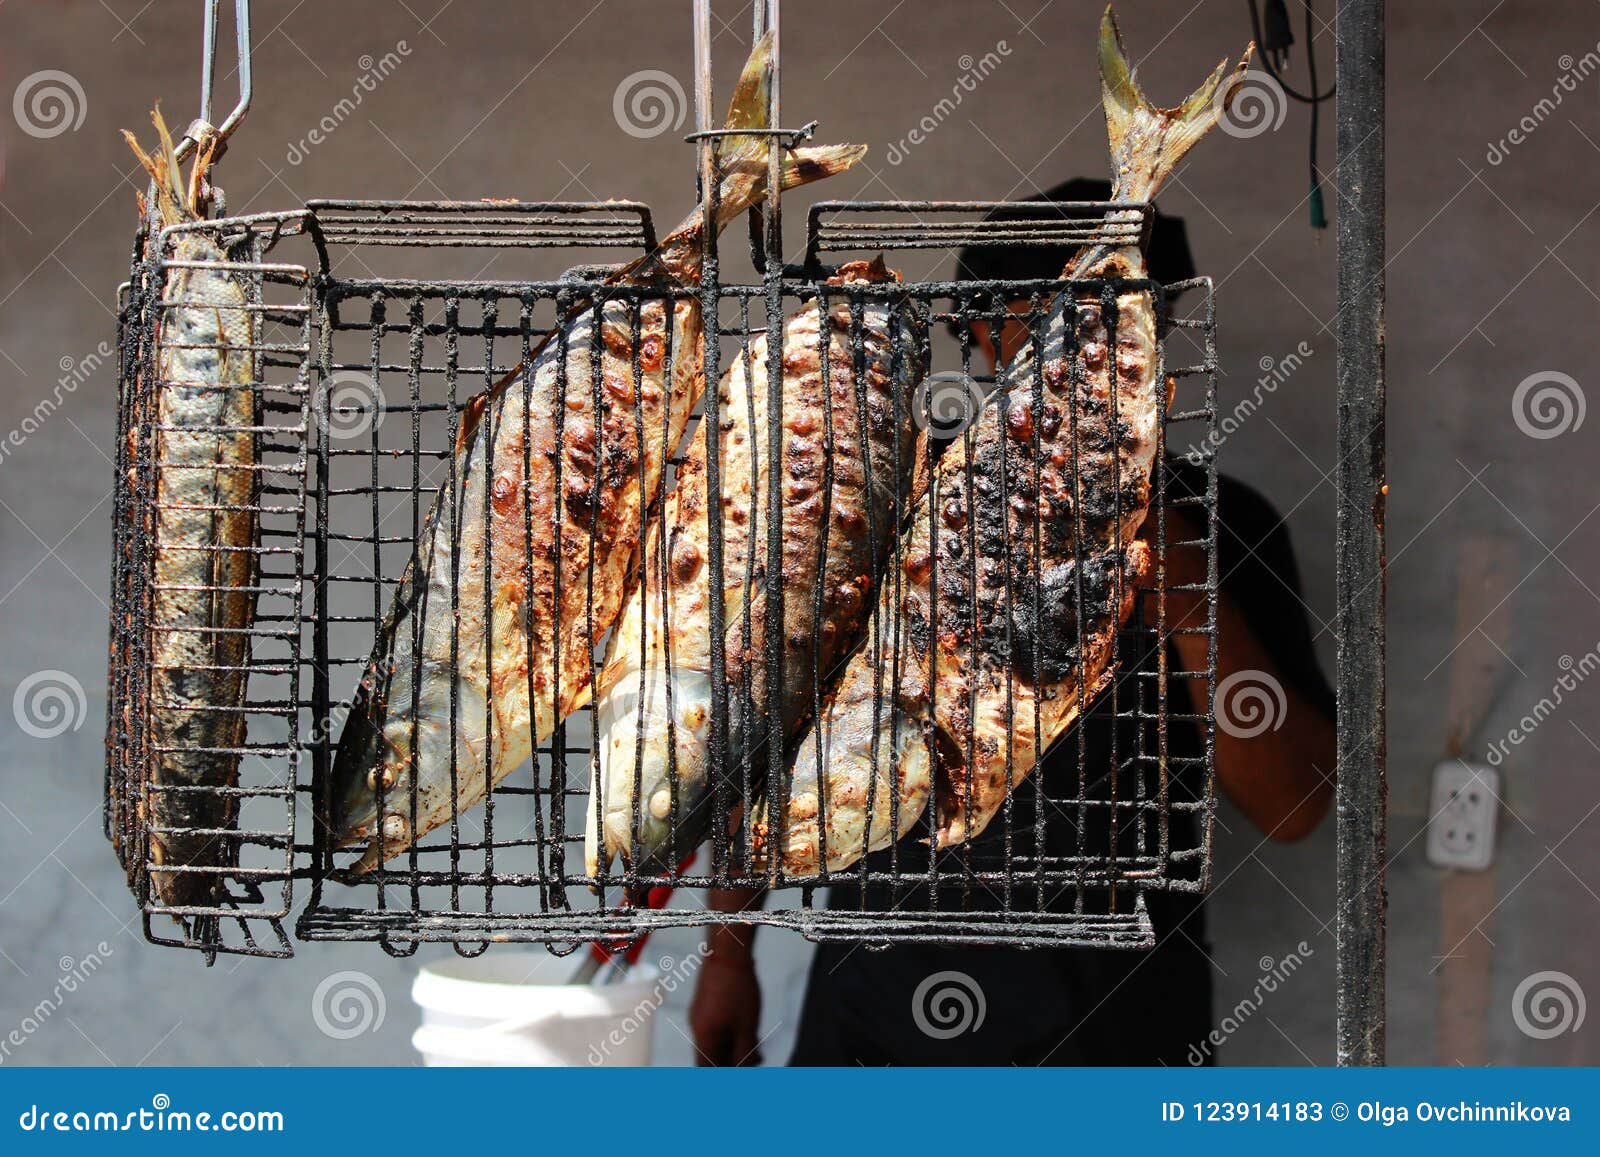 Fried Fish Cooked Entirely On An Open Fire On The ...